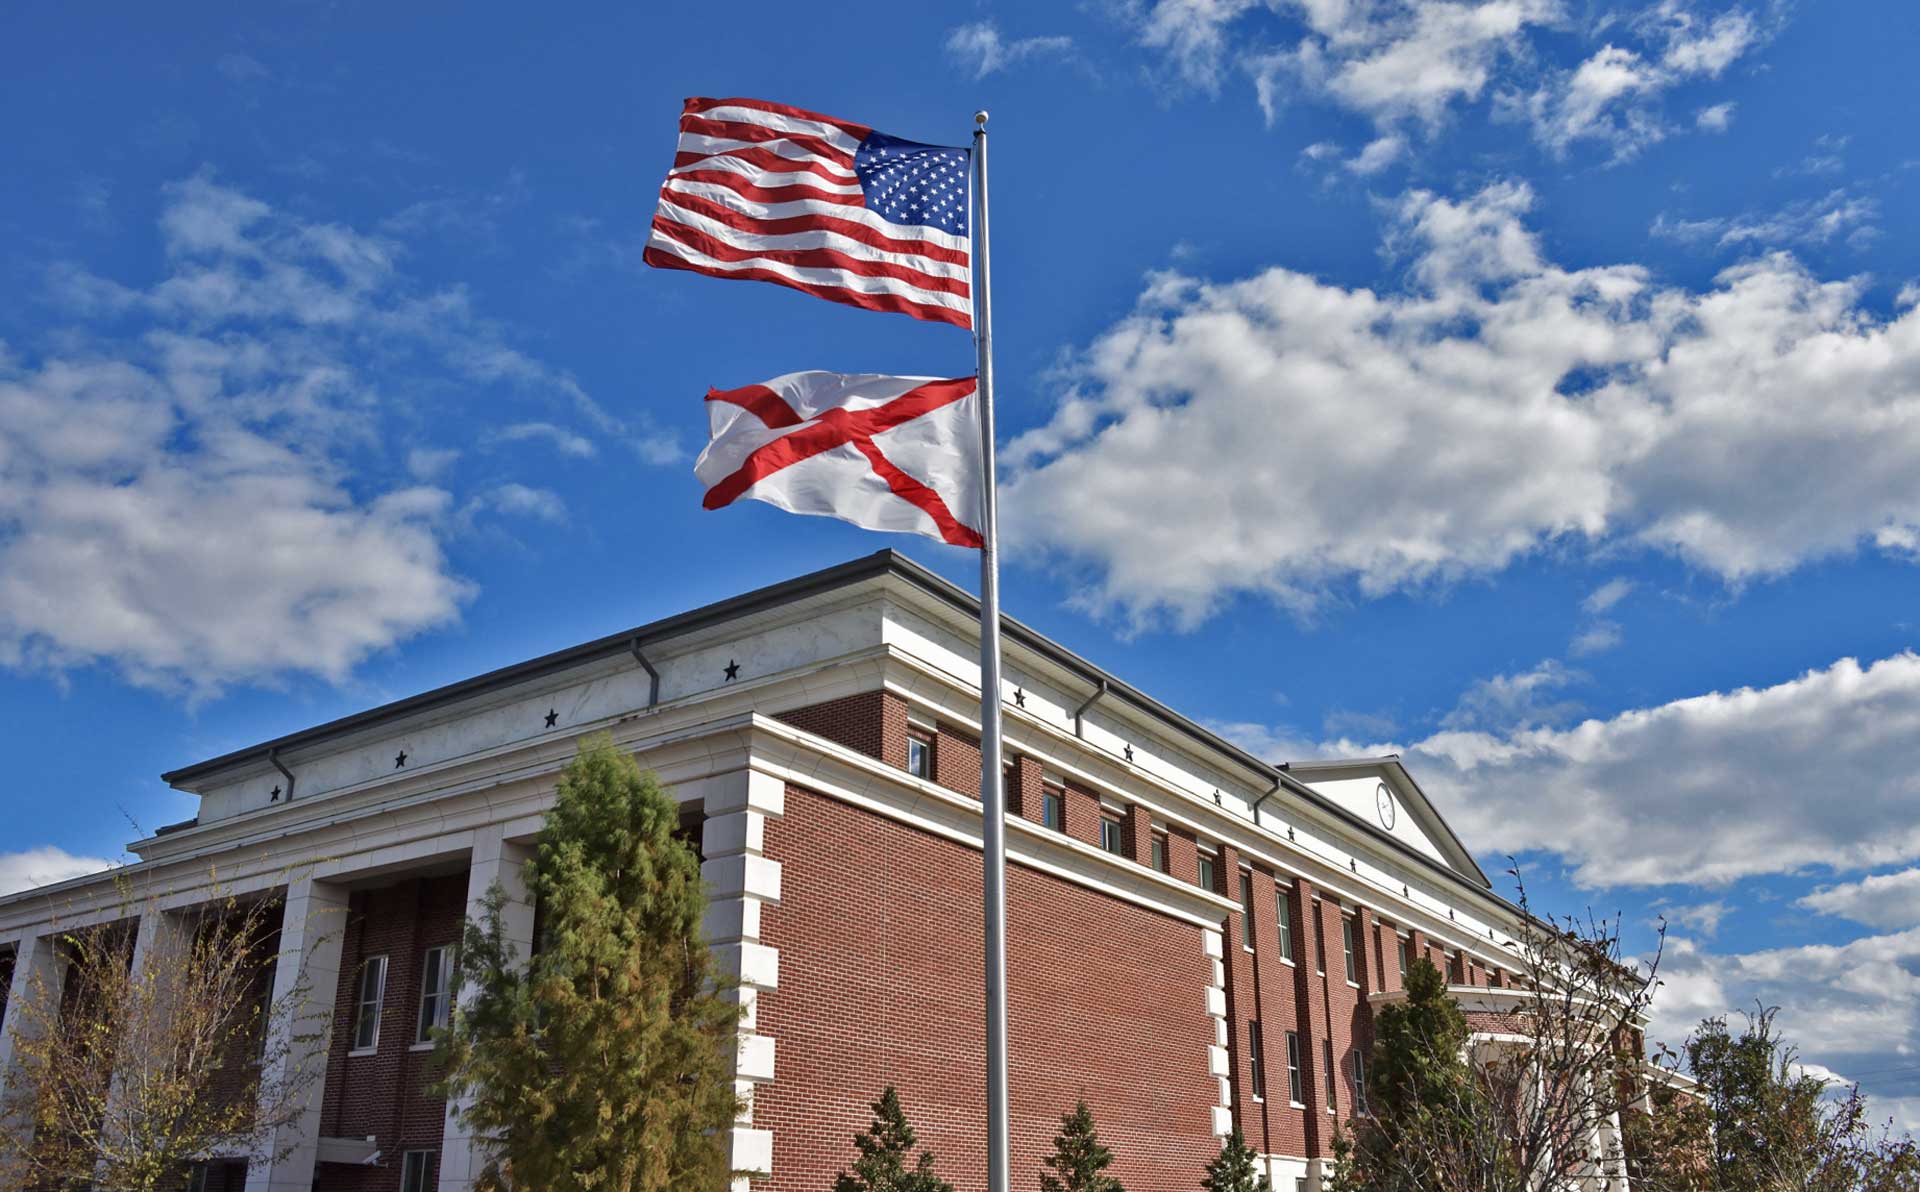 Courthouse flagpole with American and Alabama flags waving in the wind and blue partially cloudy skies